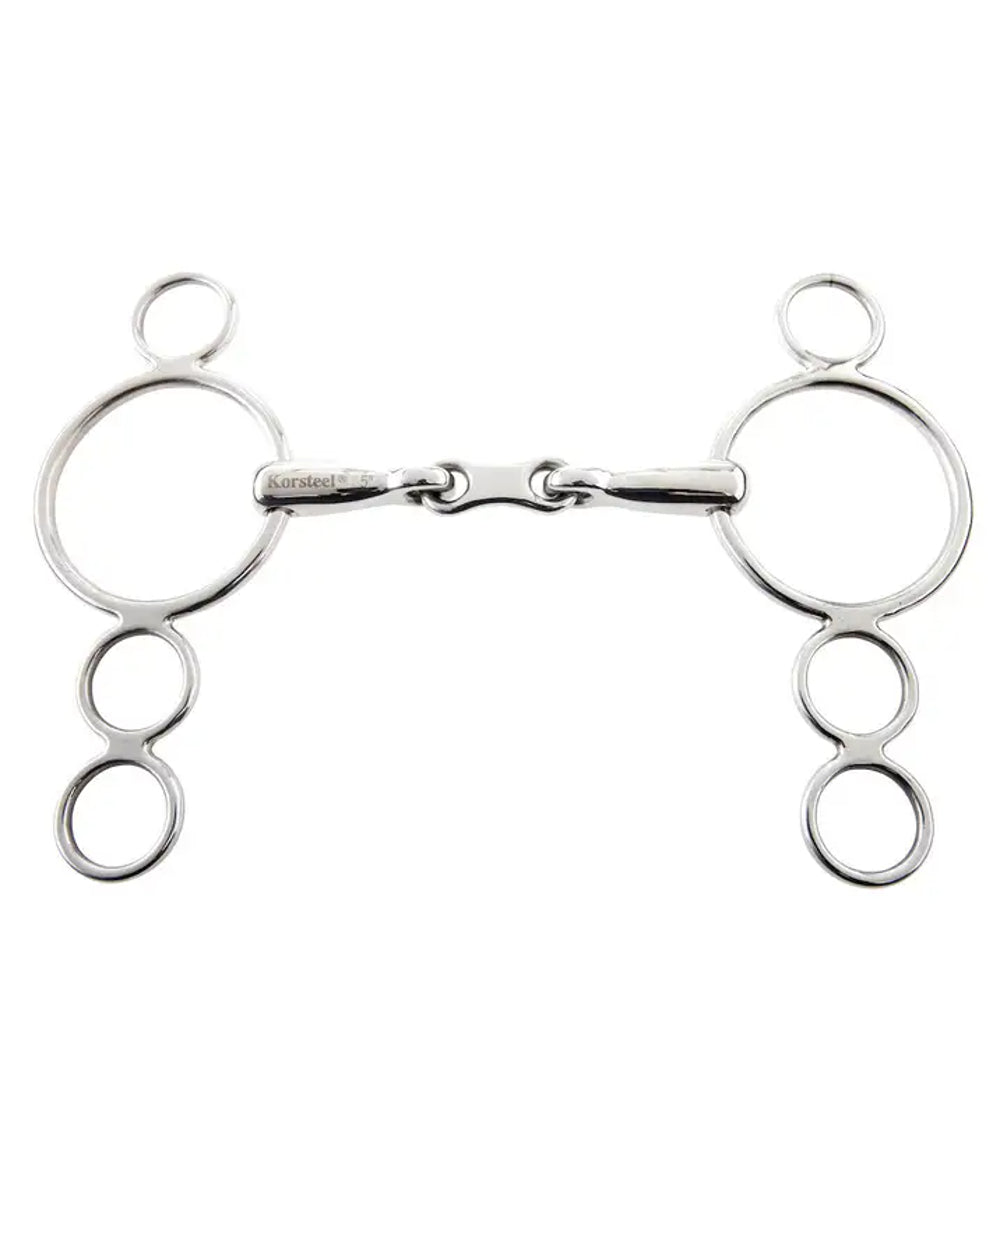 One Colour coloured Korsteel Stainless Steel French Link 3 Ring Dutch Gag Bit on white background